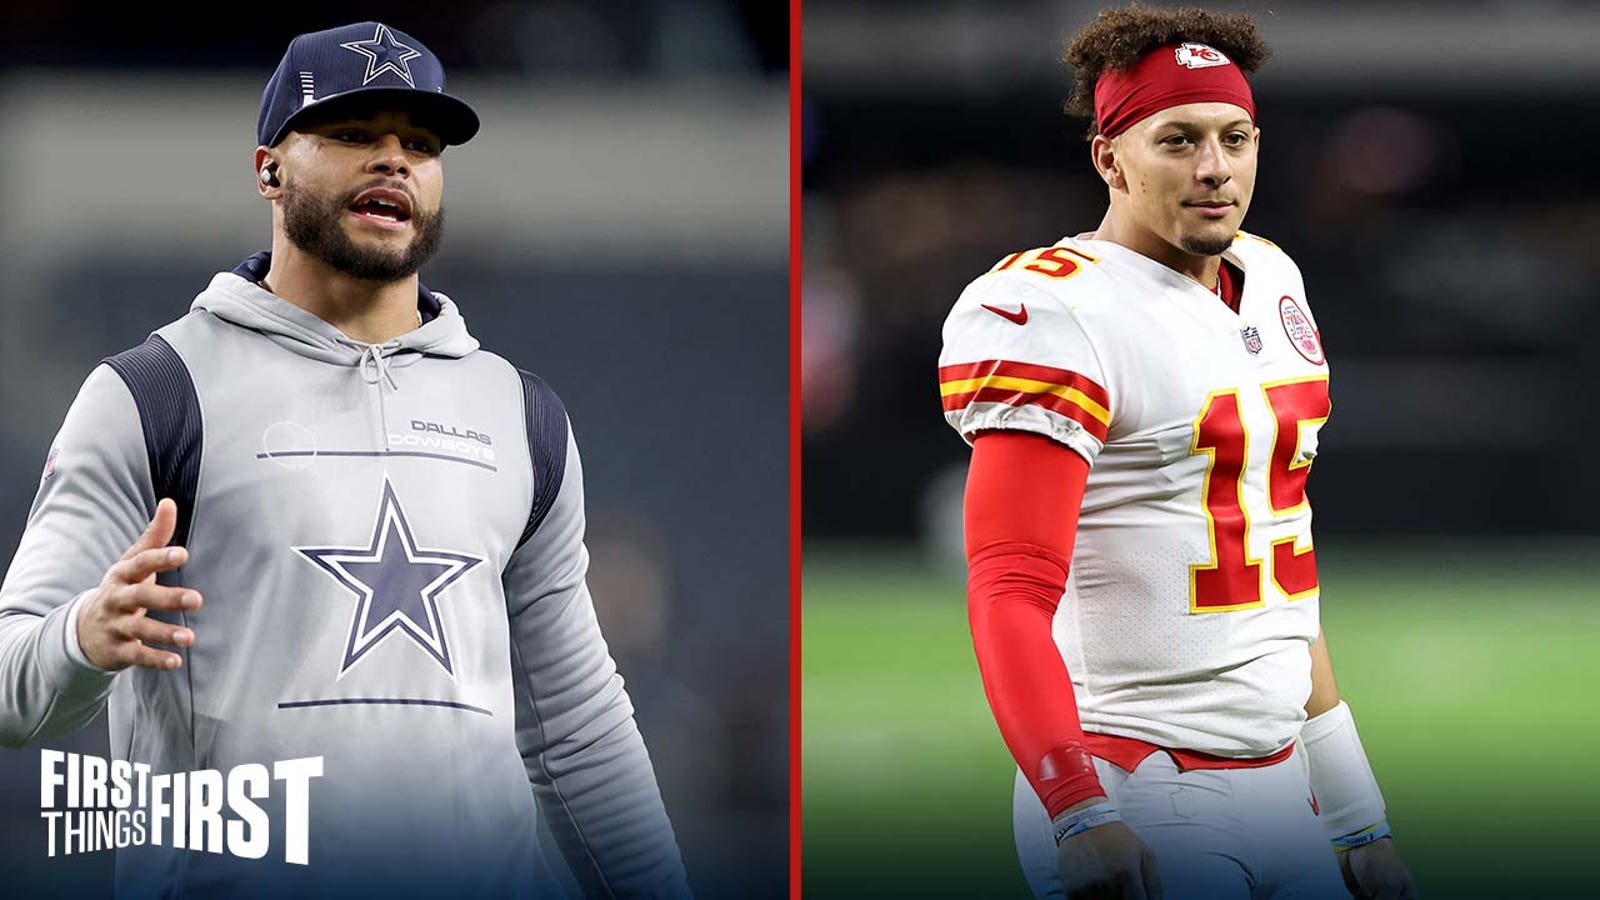 Nick Wright says his Chiefs are still the team to beat: 'But the Cowboys could do it' I FIRST THINGS FIRST